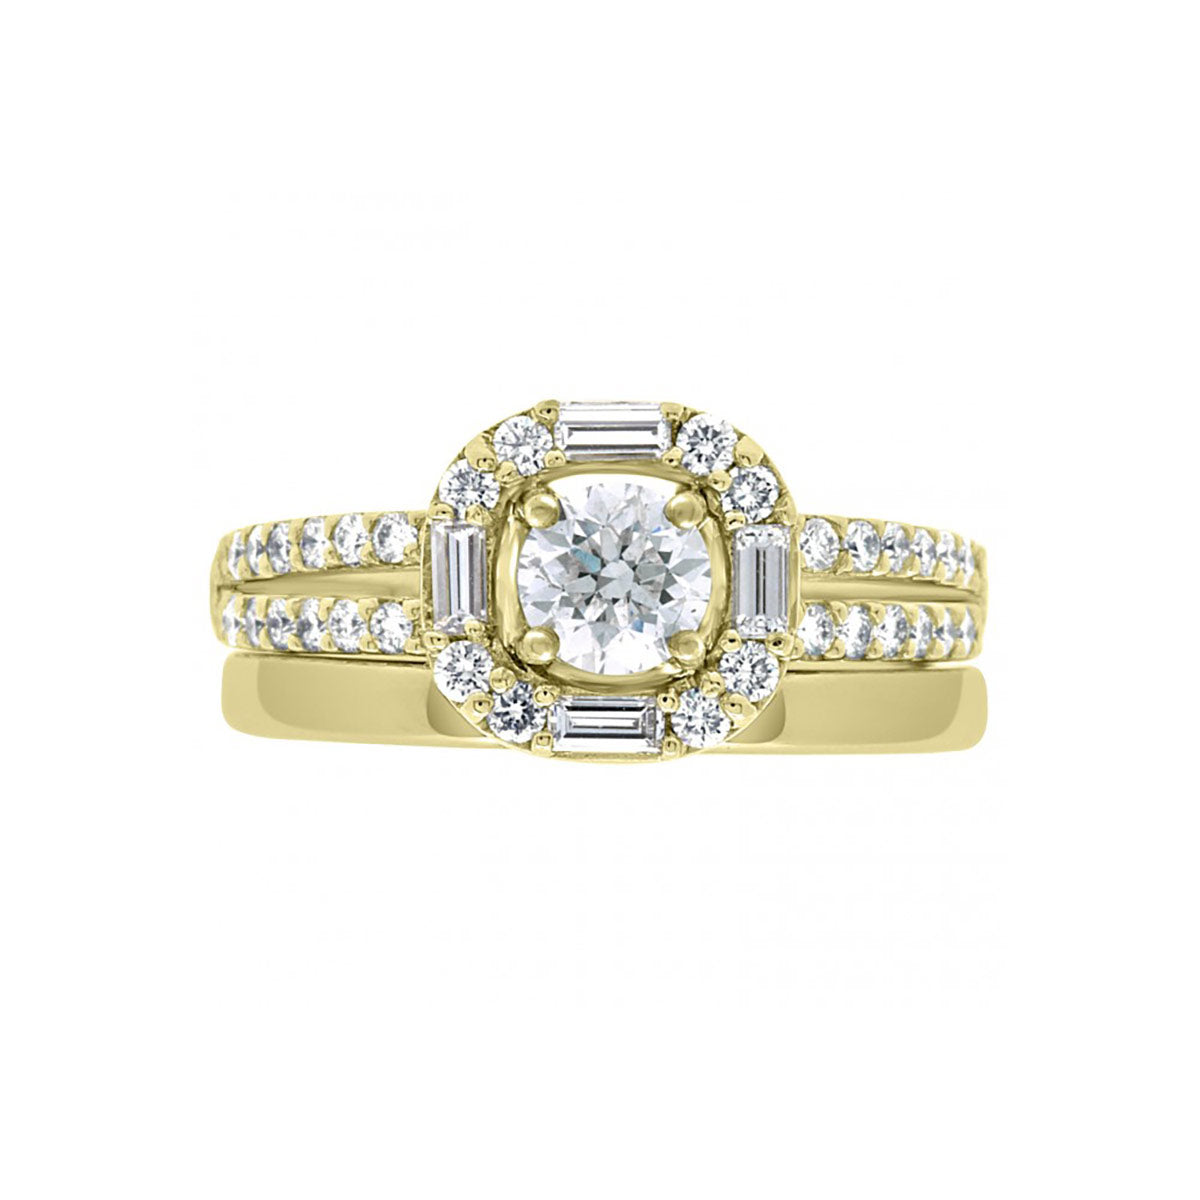 Baguette and Round Diamond Engagement Ring in yellow gold pictured with a plain gold wedding band